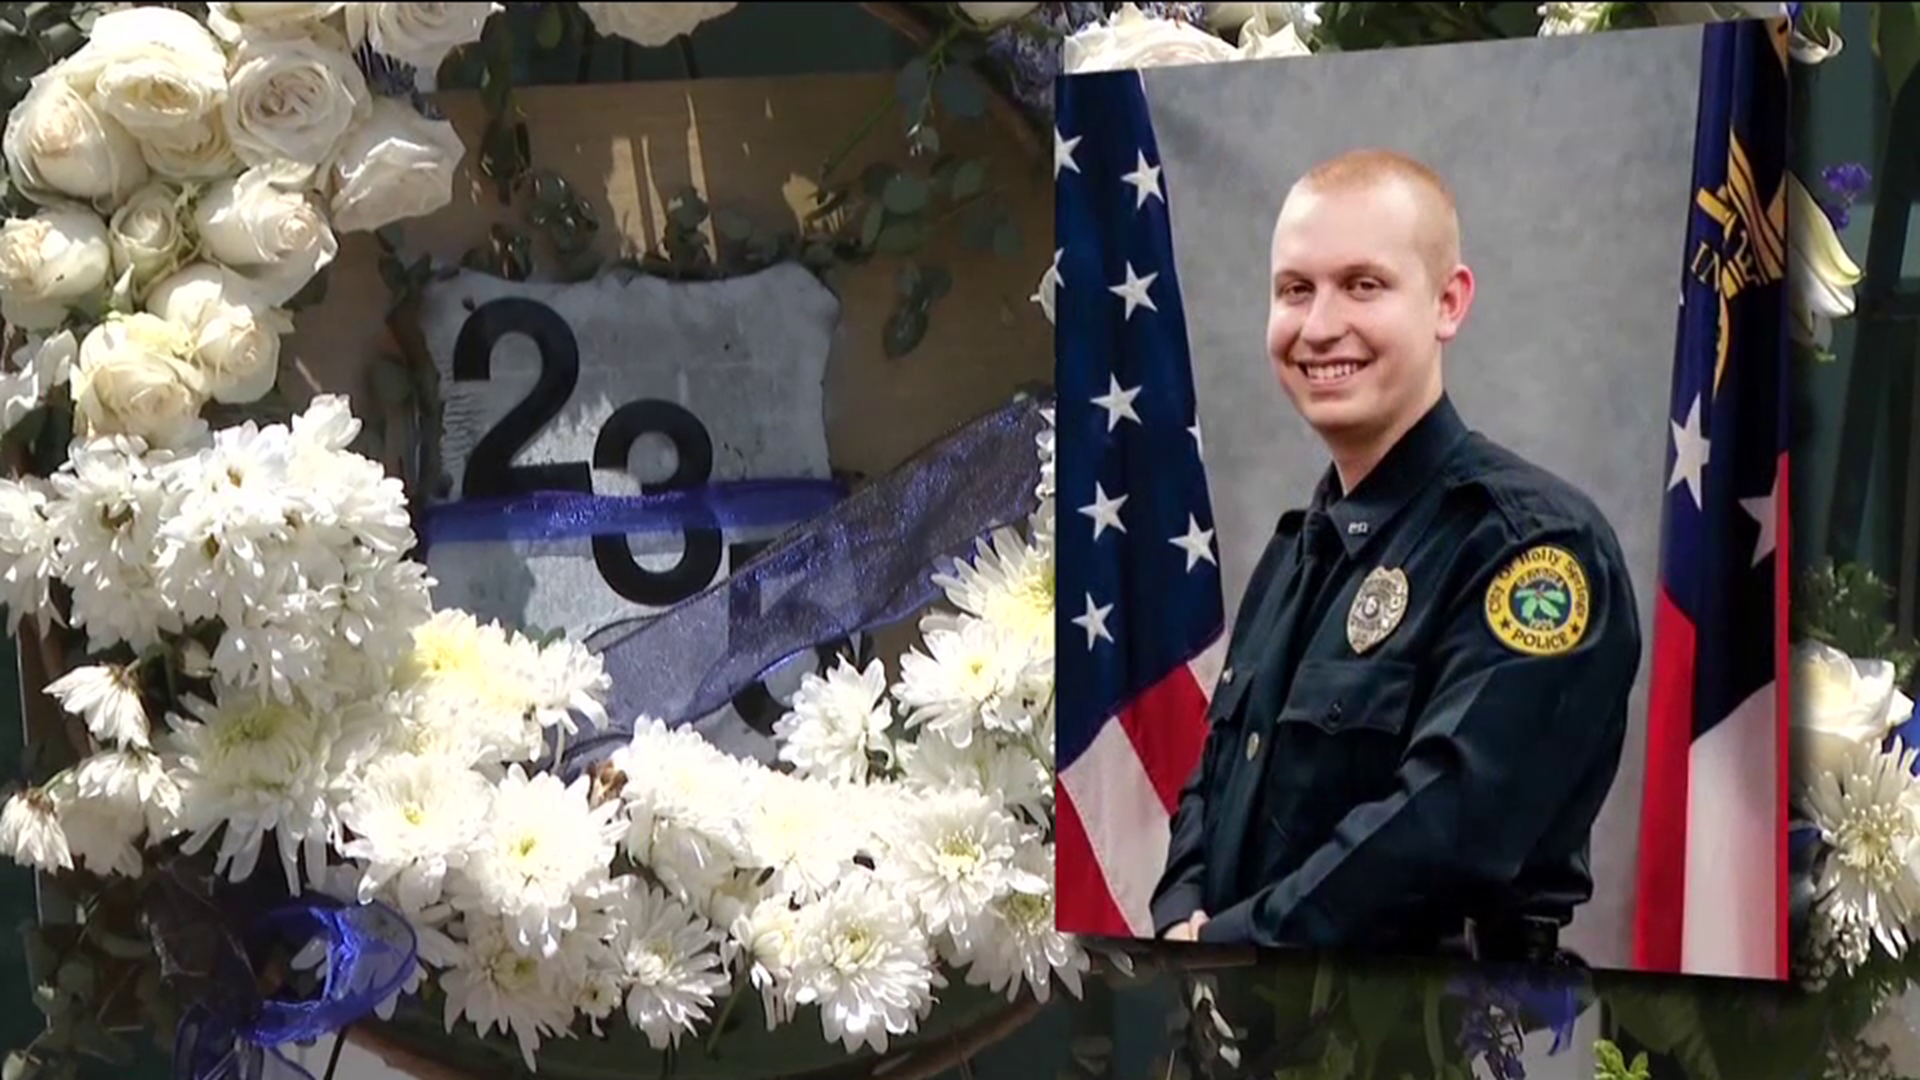 The community and fellow officers from around metro Atlanta said goodby to Joe Burson on Monday following his death in the line of duty just days earlier.